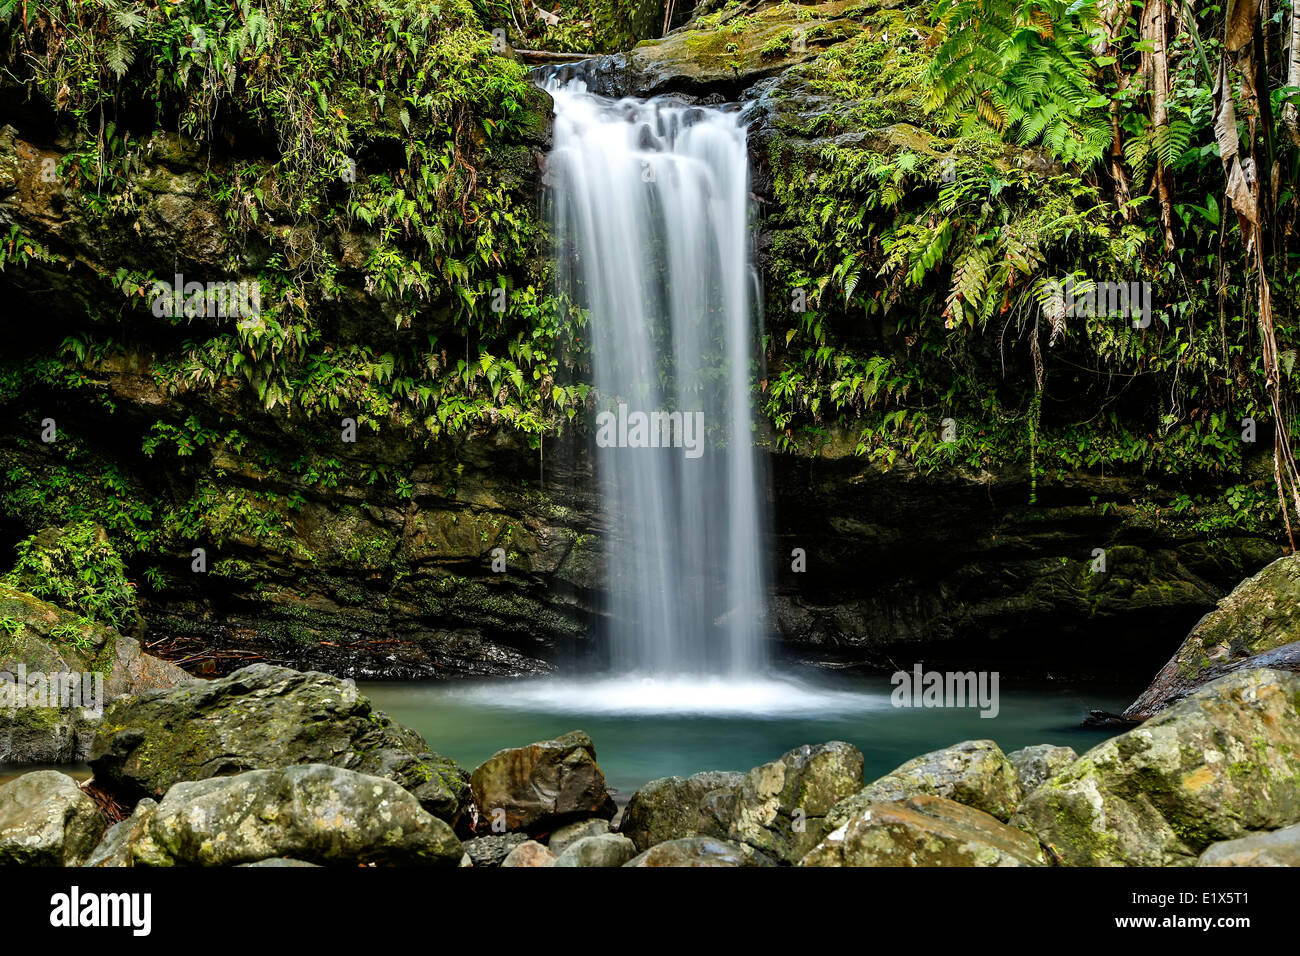 Juan Diego Waterfall, Caribbean National Forest (El Yunque Rain Forest), Puerto Rico Stock Photo